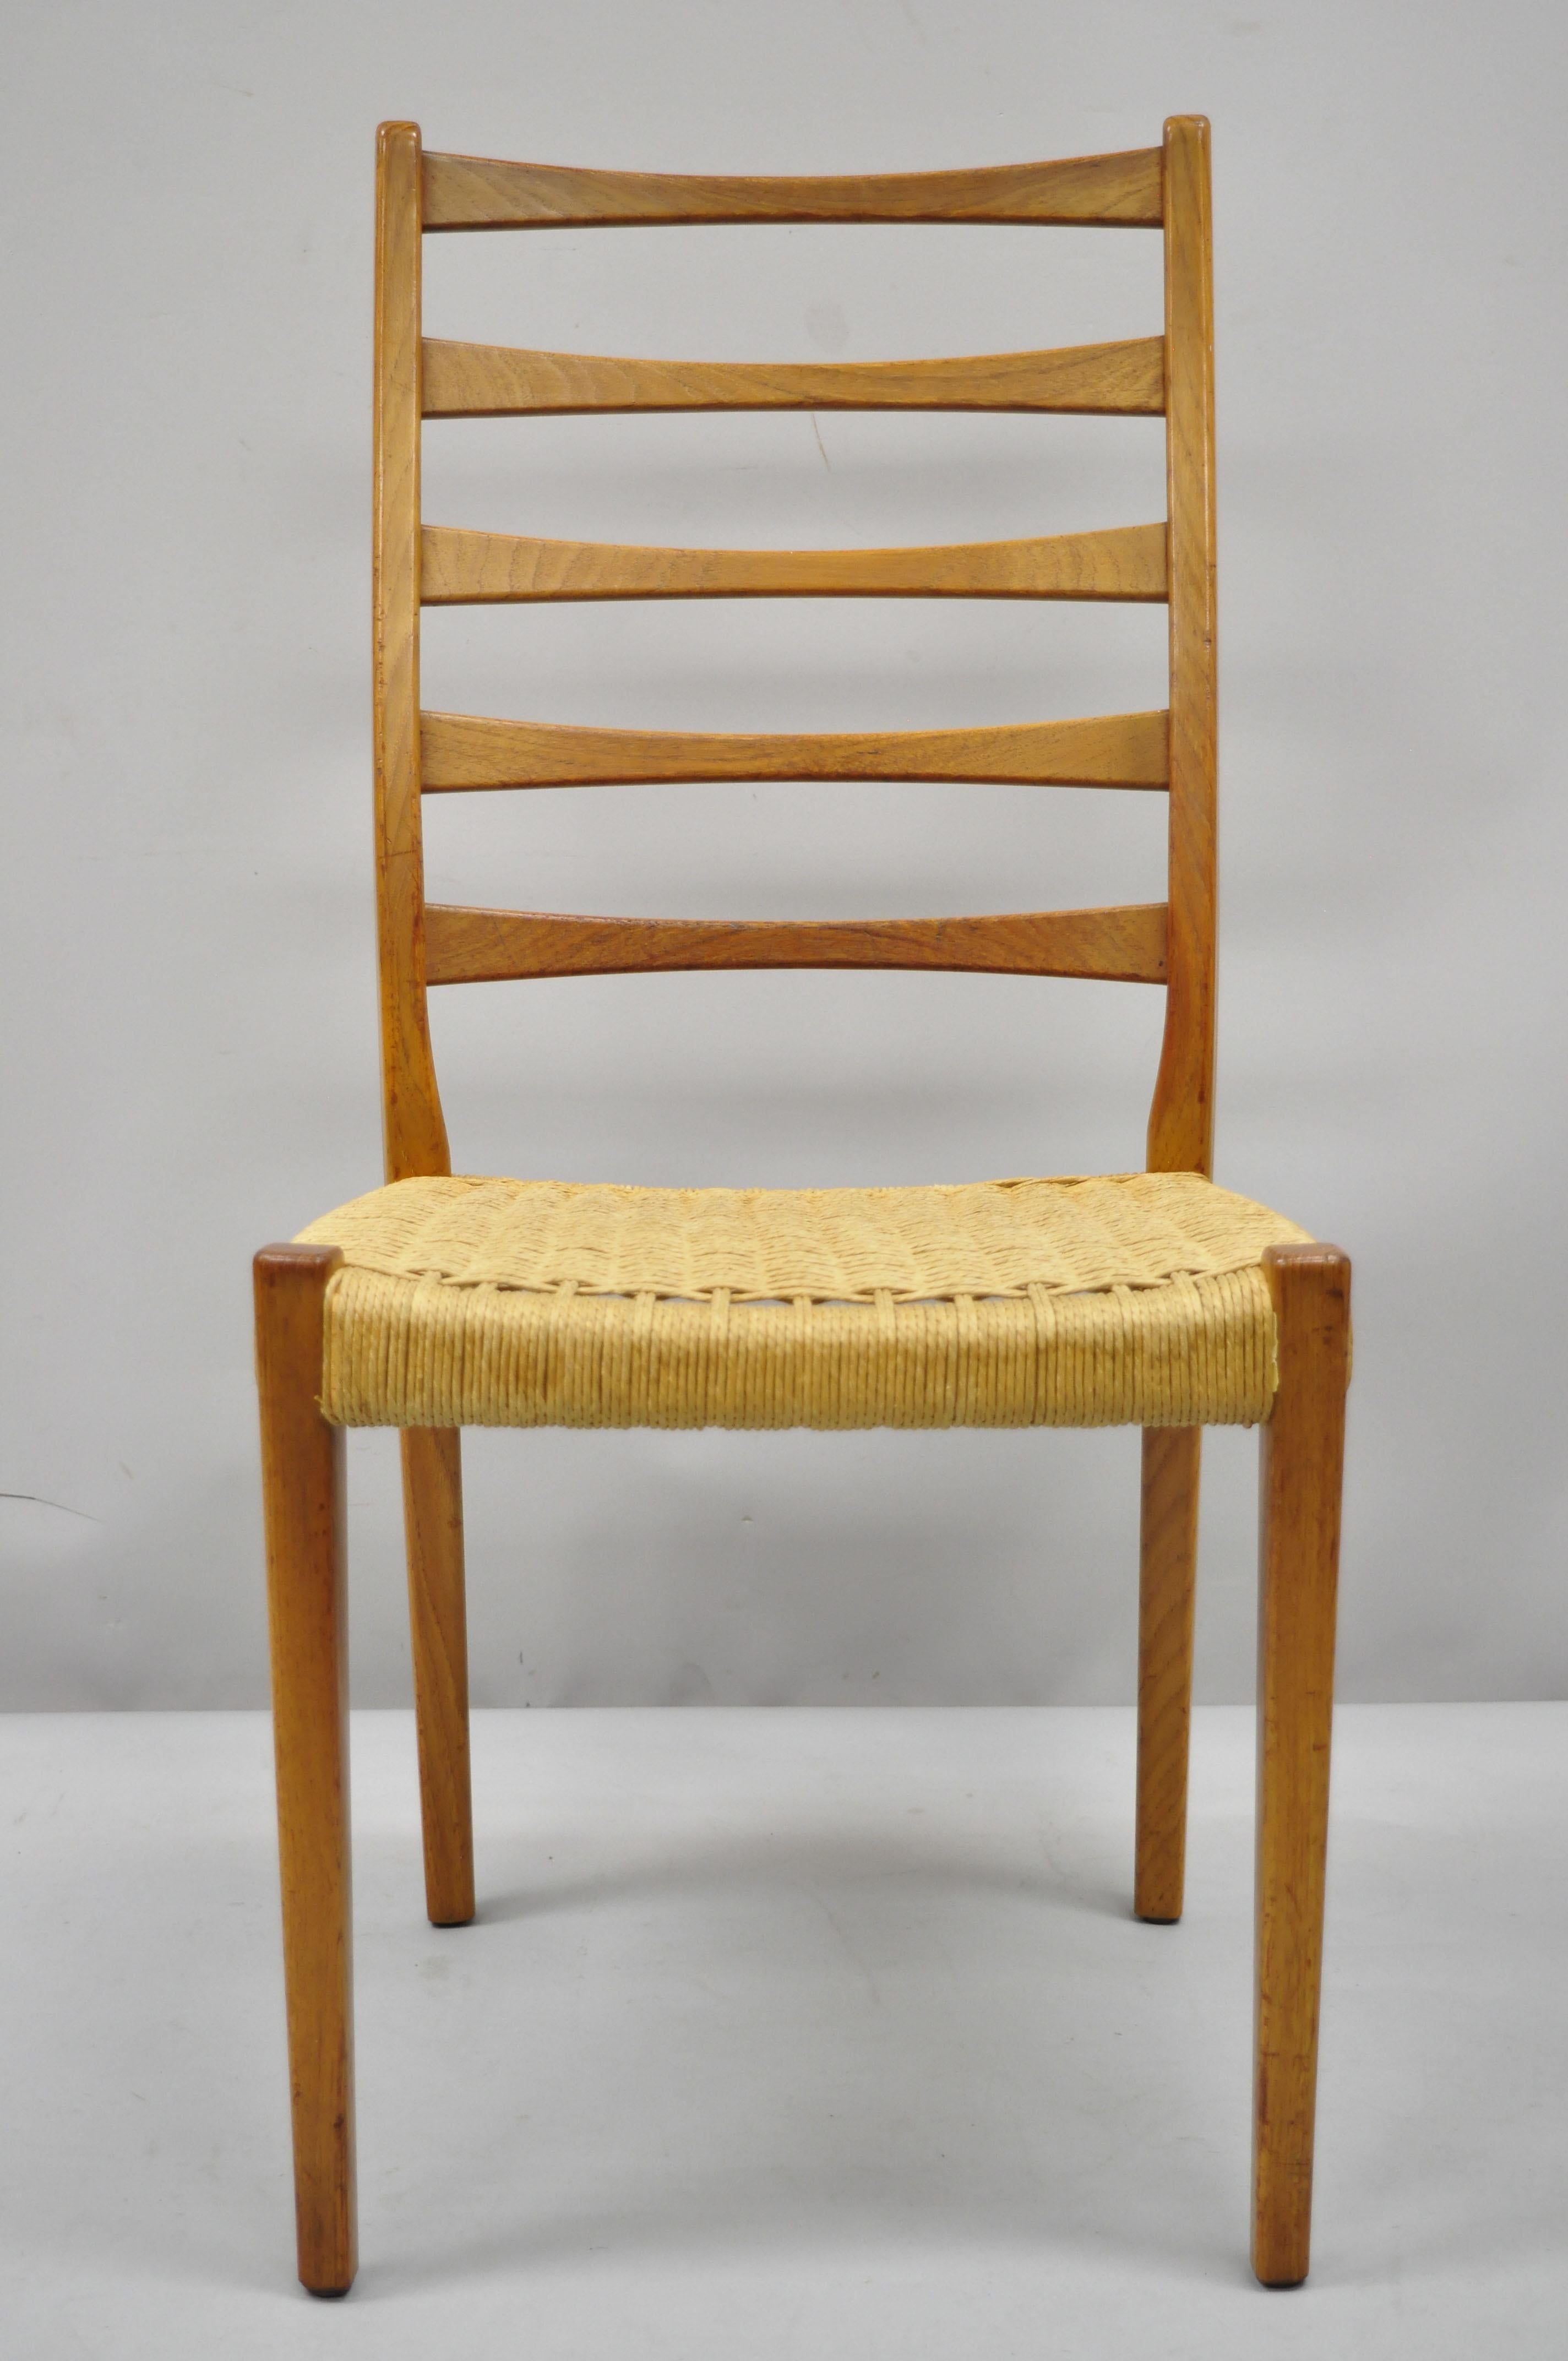 Midcentury Danish Swedish modern Svegards Markaryd teak rope dining chair. Item features woven rope seat, solid wood frame, beautiful wood grain, original stamp, tapered legs, clean modernist lines, quality craftsmanship, circa mid-20th century.